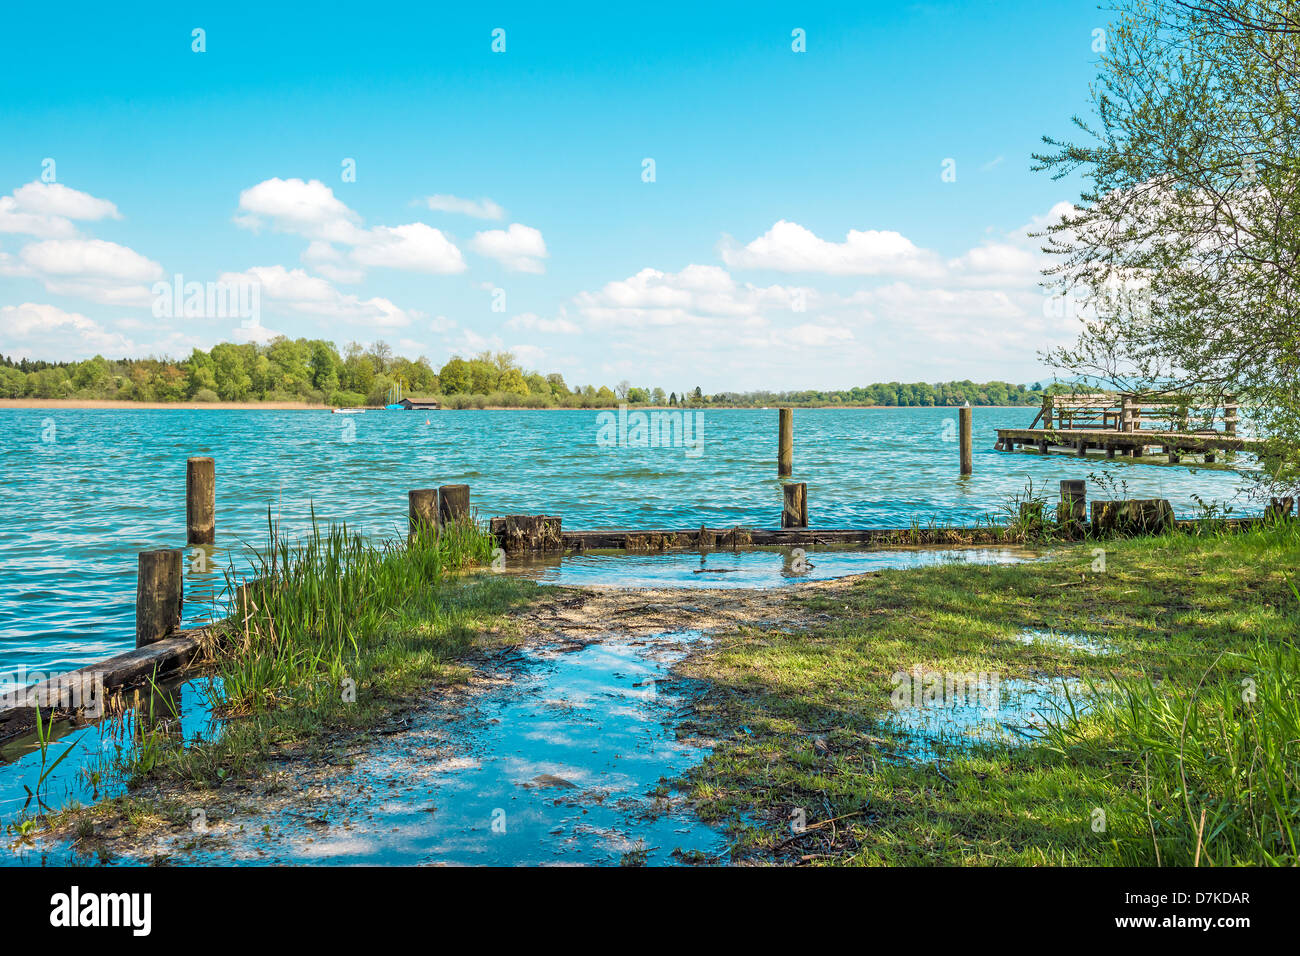 Flooded shore of Chiemsee, Germany, in bright sun with blue sky and white clouds Stock Photo